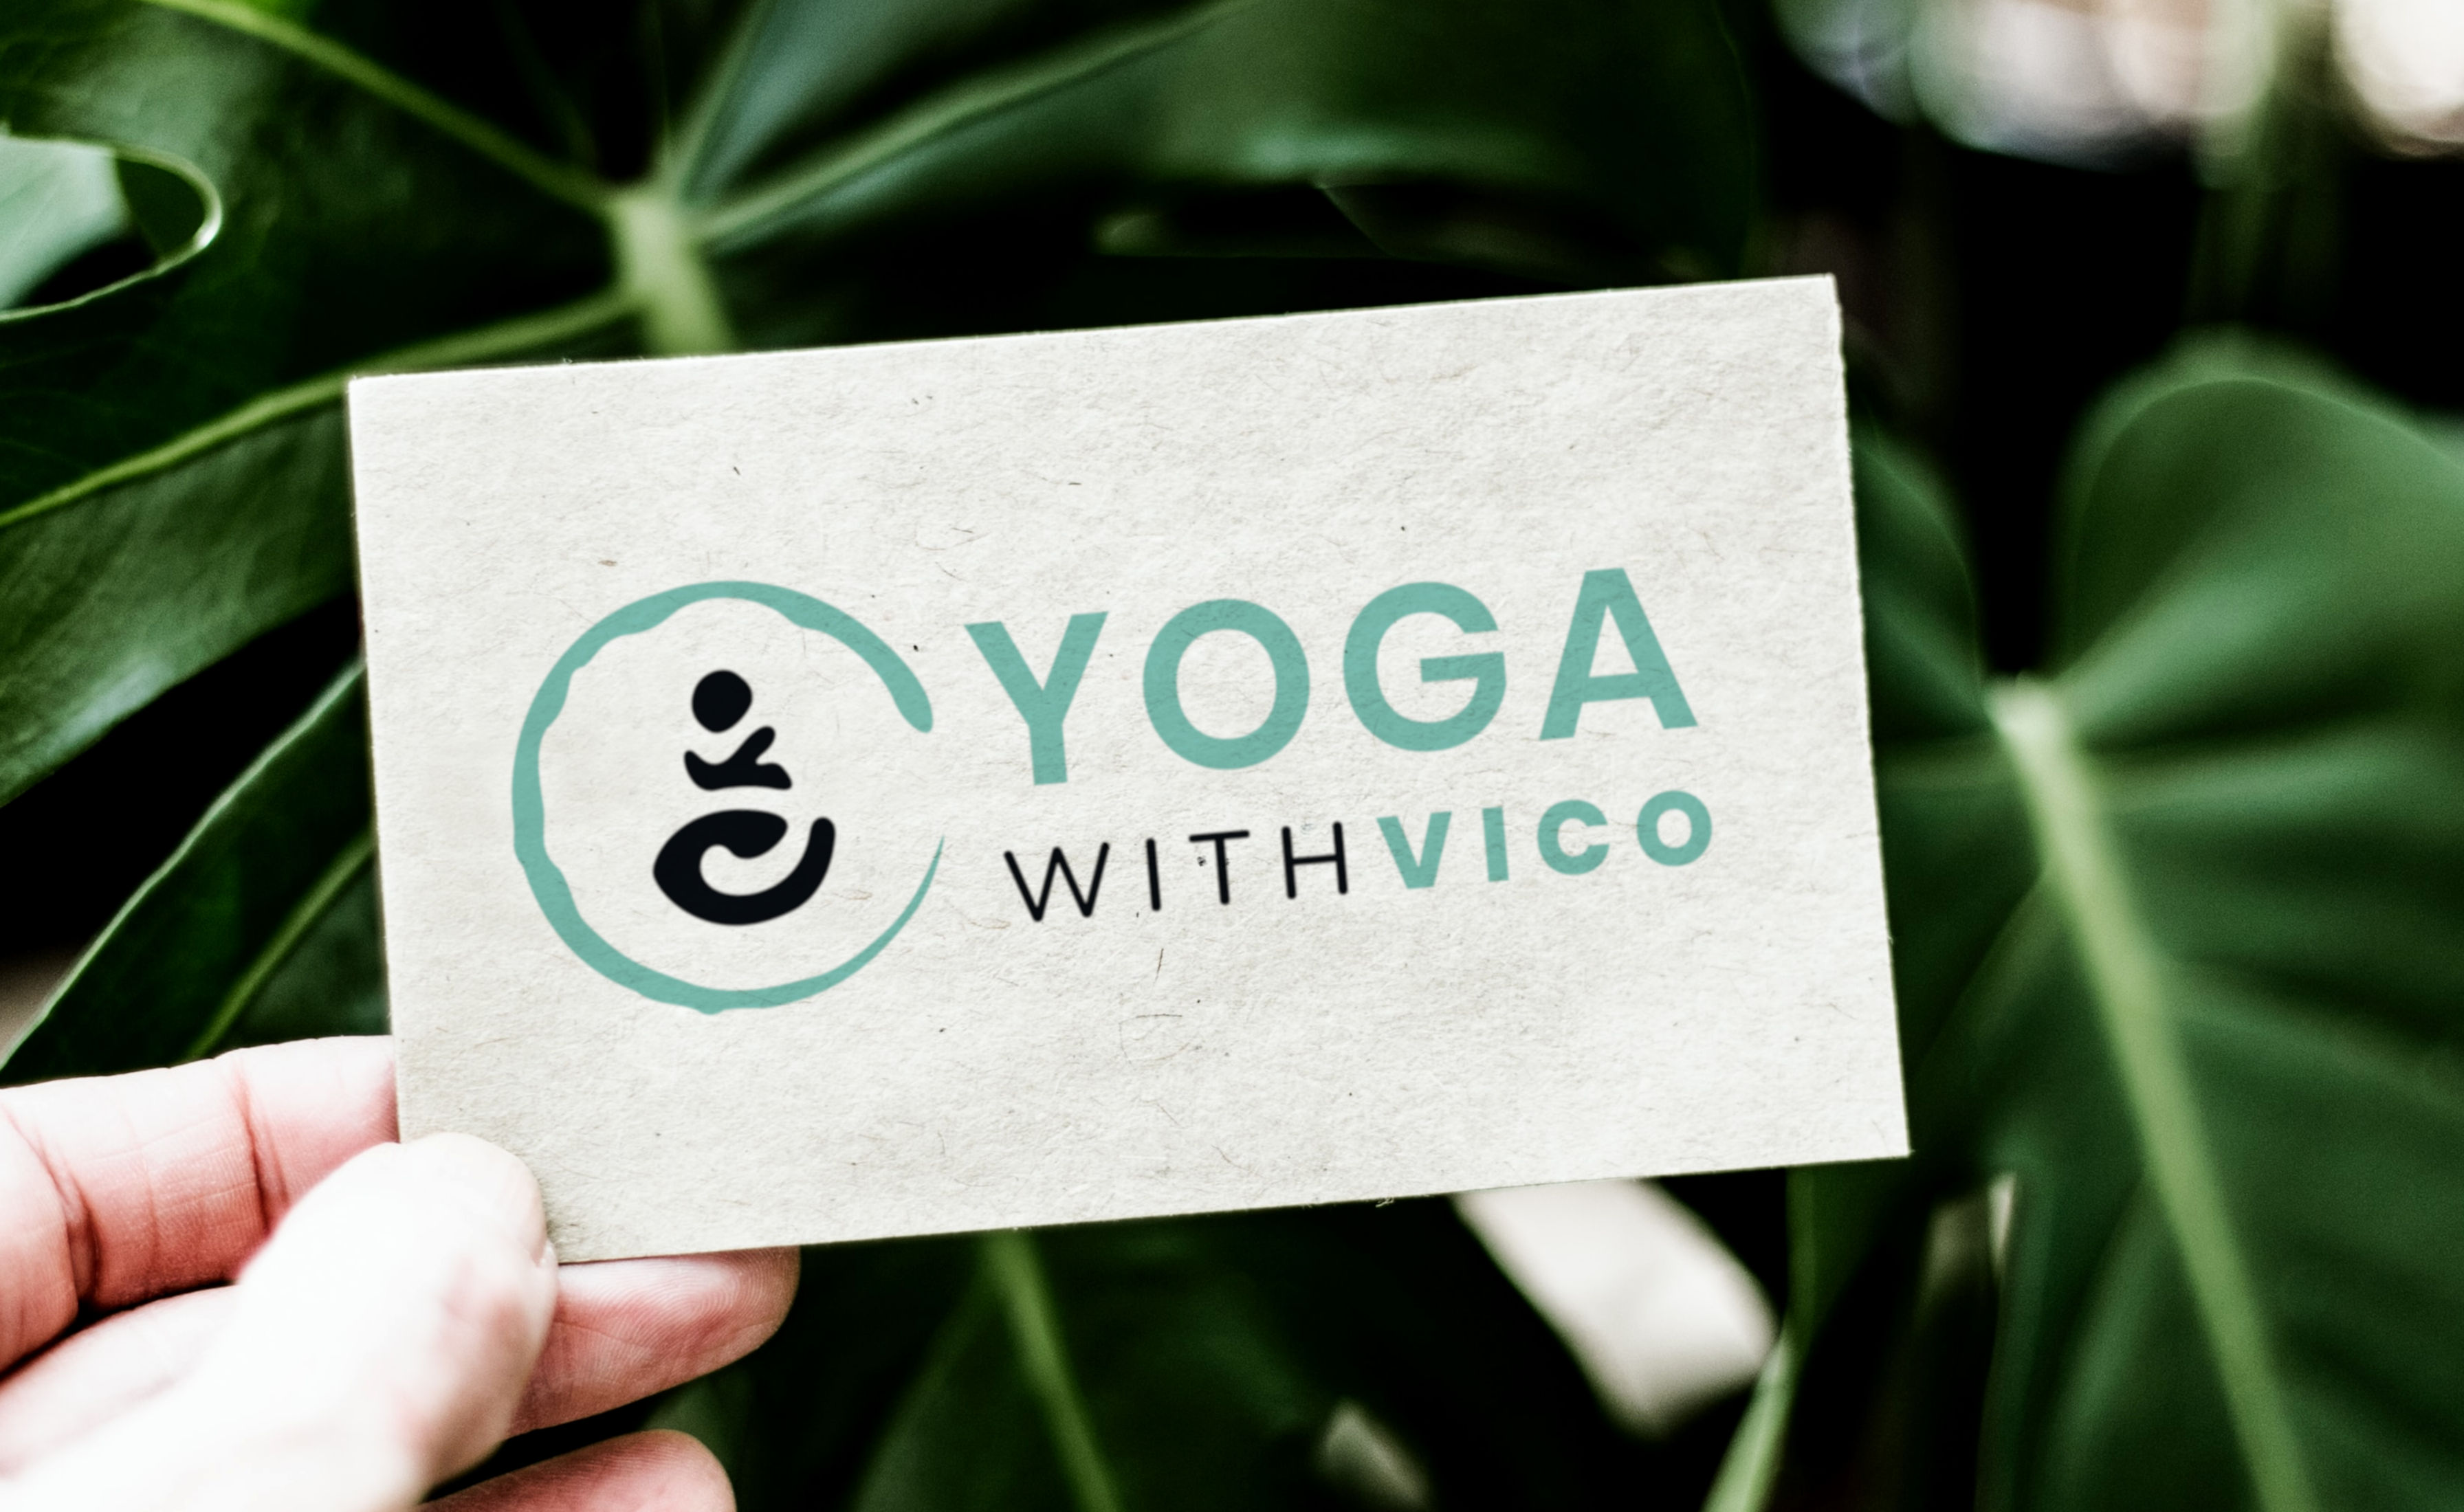 Yoga with Vico's rectangular logo design shown on a business card made from recycled paper. The card is held by a hand in front of green plant leaves.
